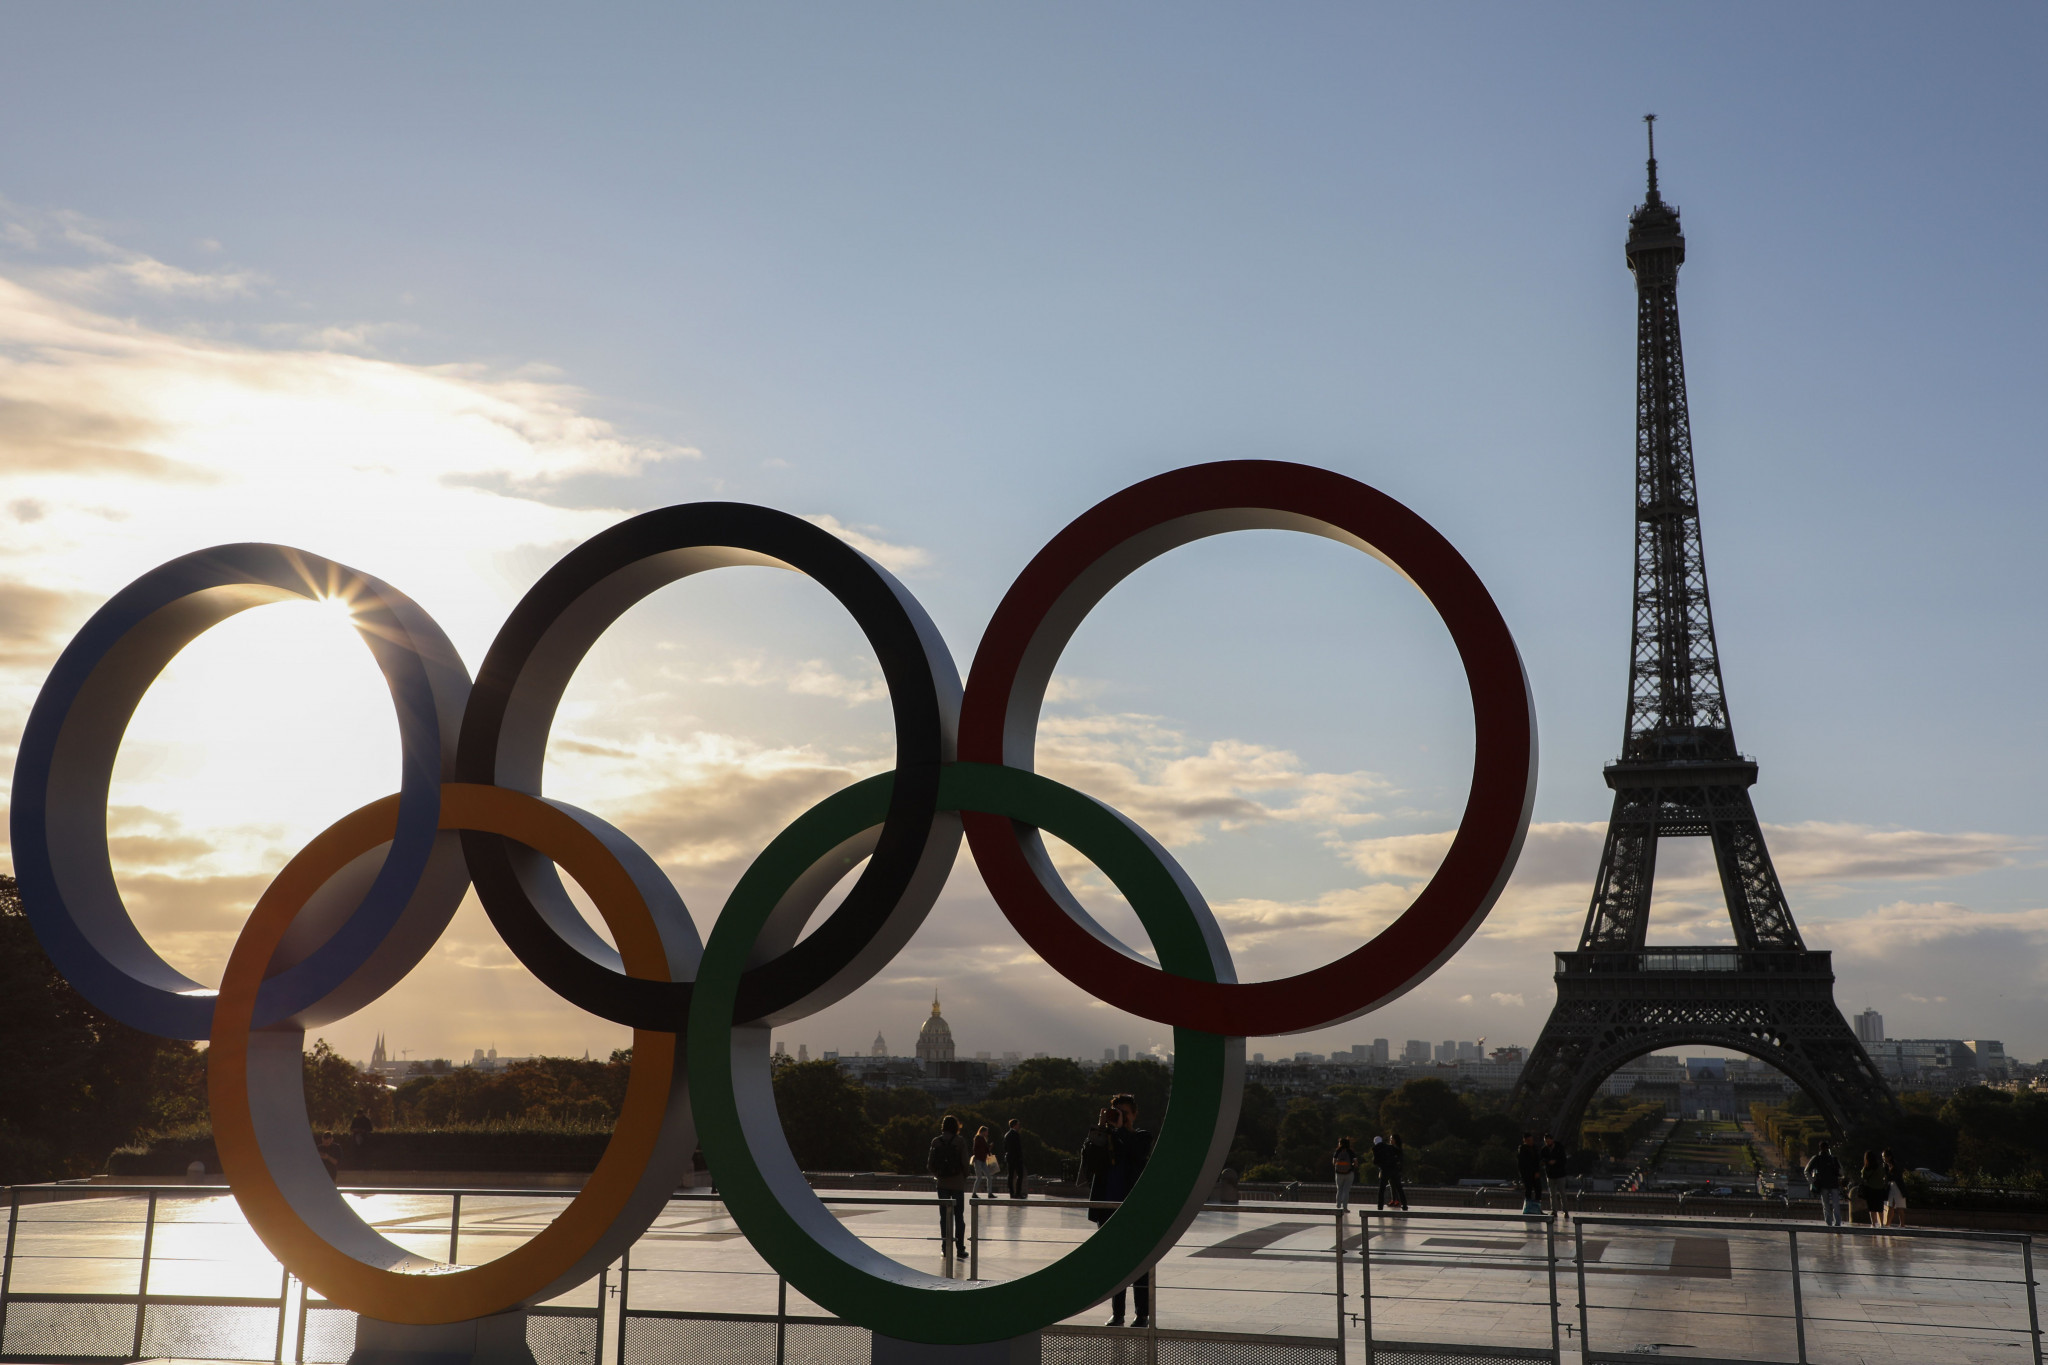 Bayi calls African nations to prepare early for Paris 2024 Olympics